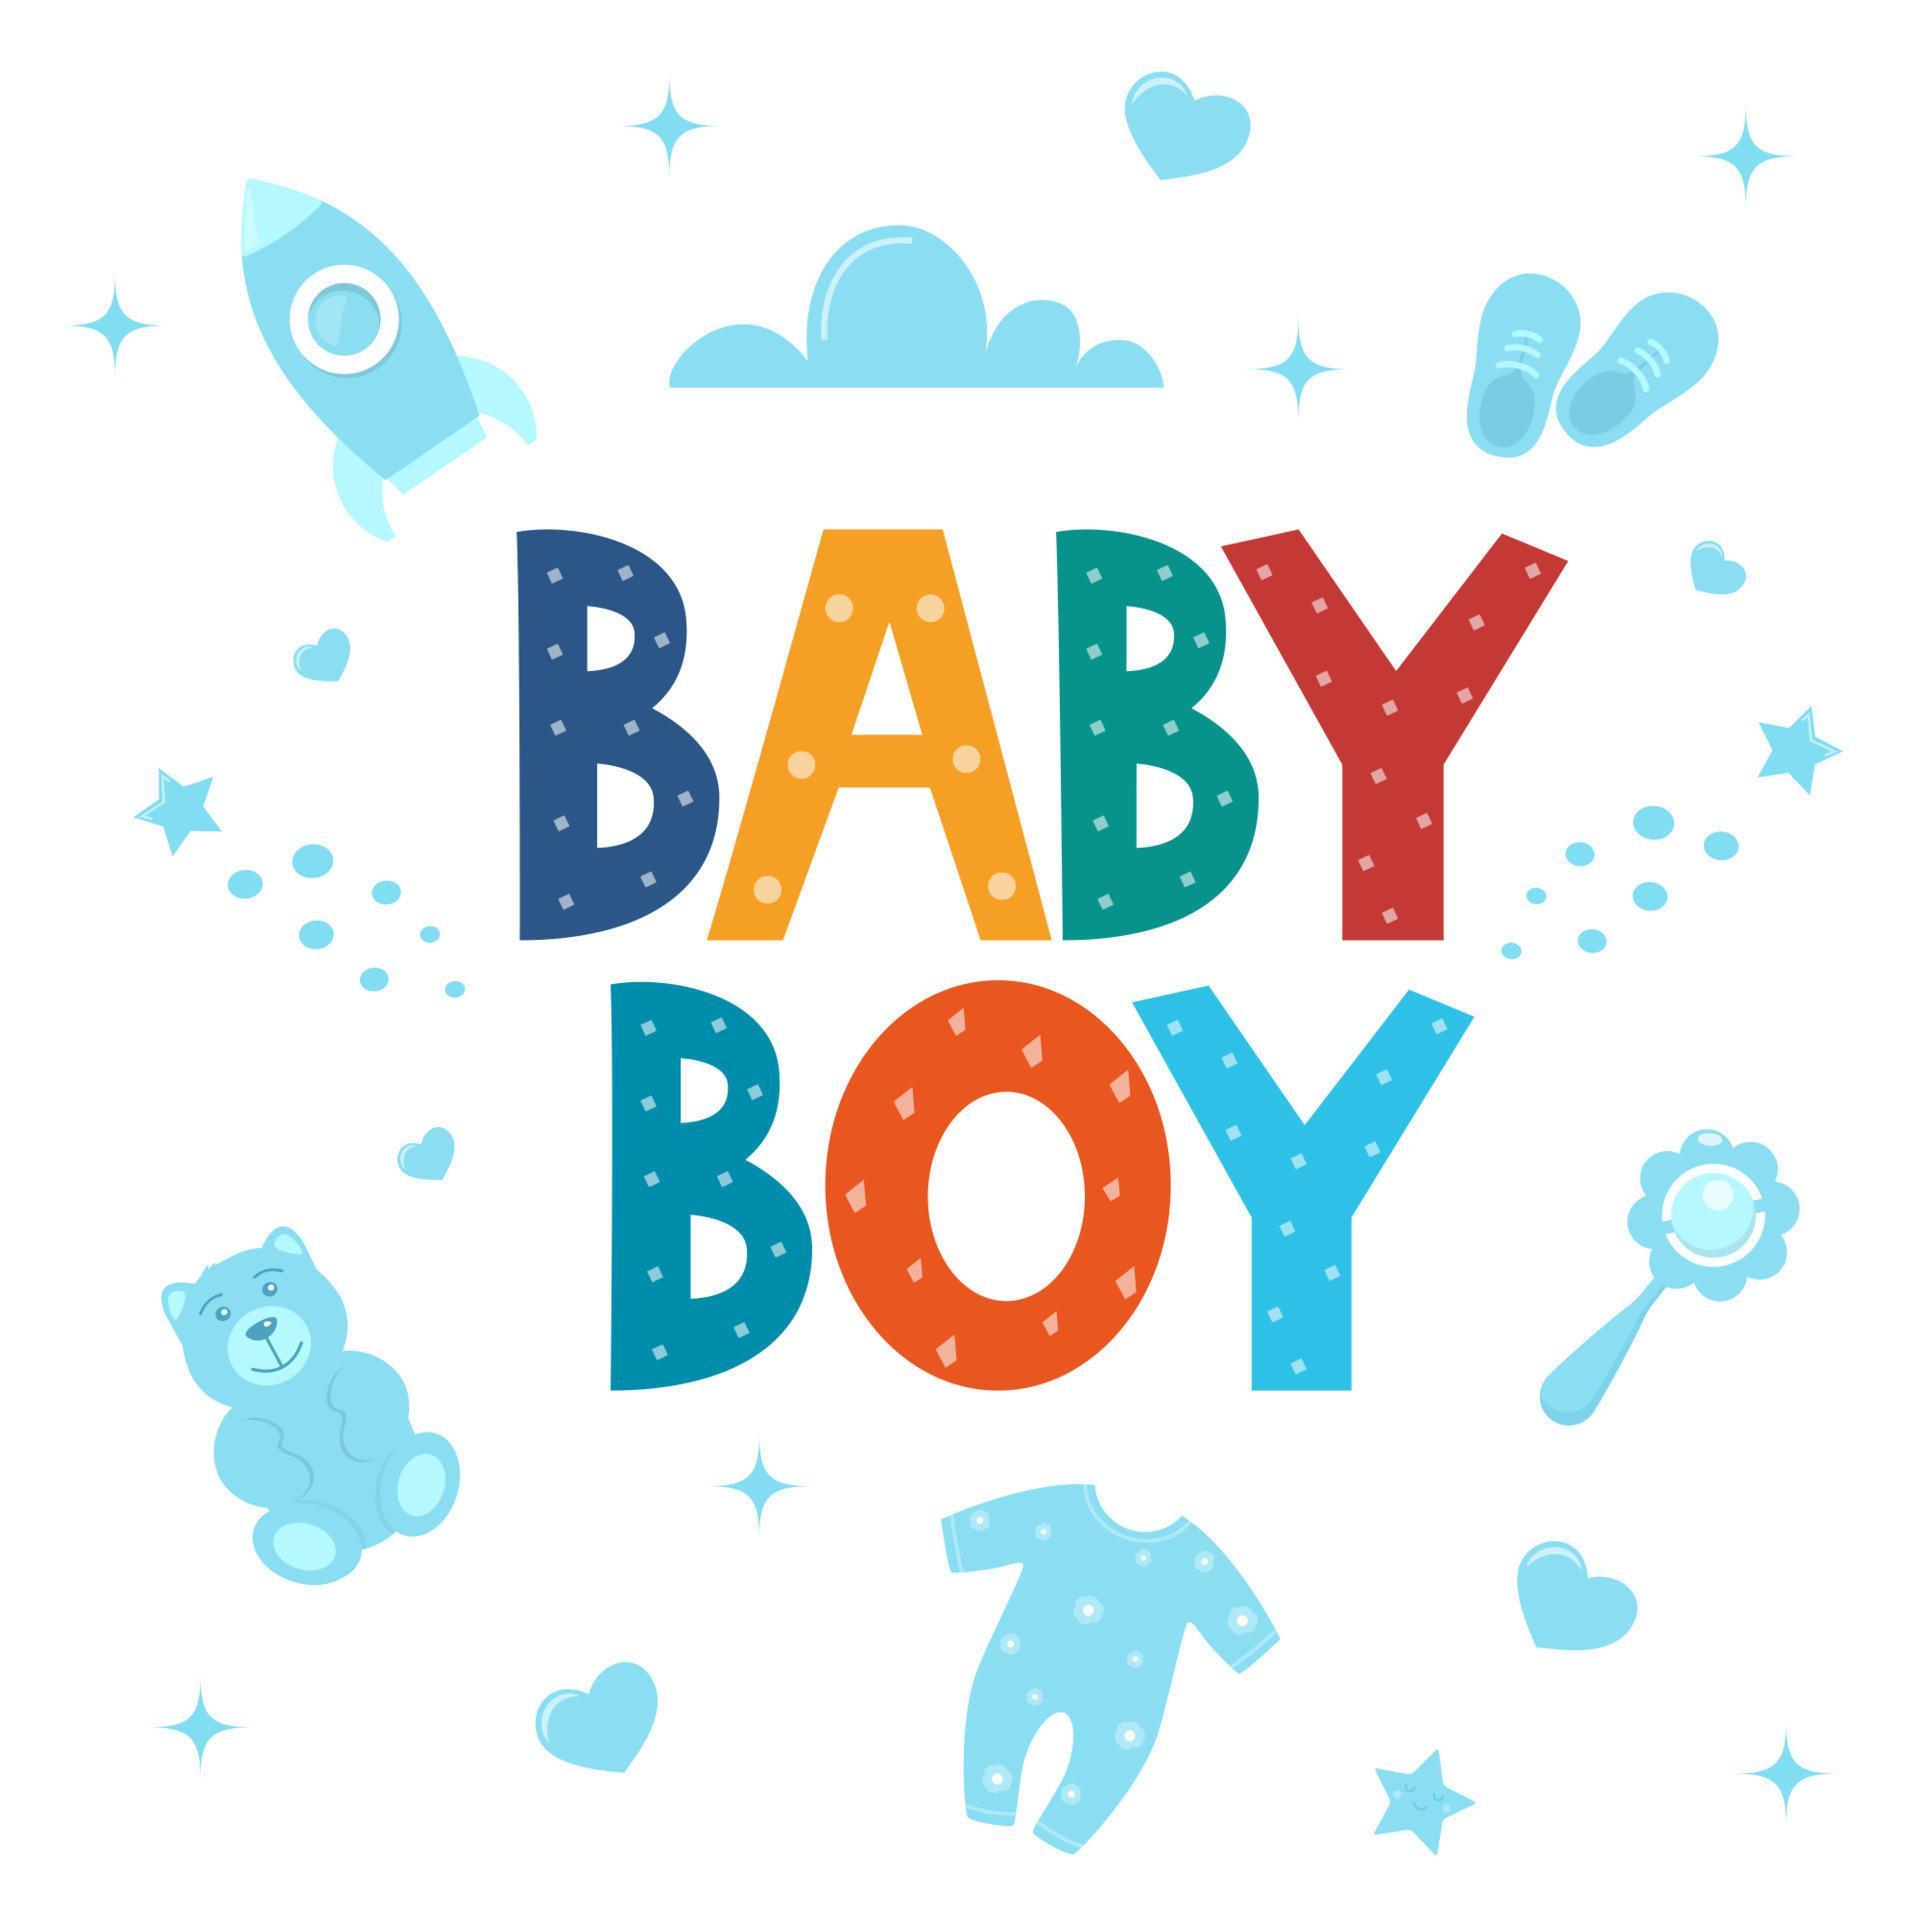 baby-shower-card-for-boys-it-s-a-boy-card-vector-invitation-with